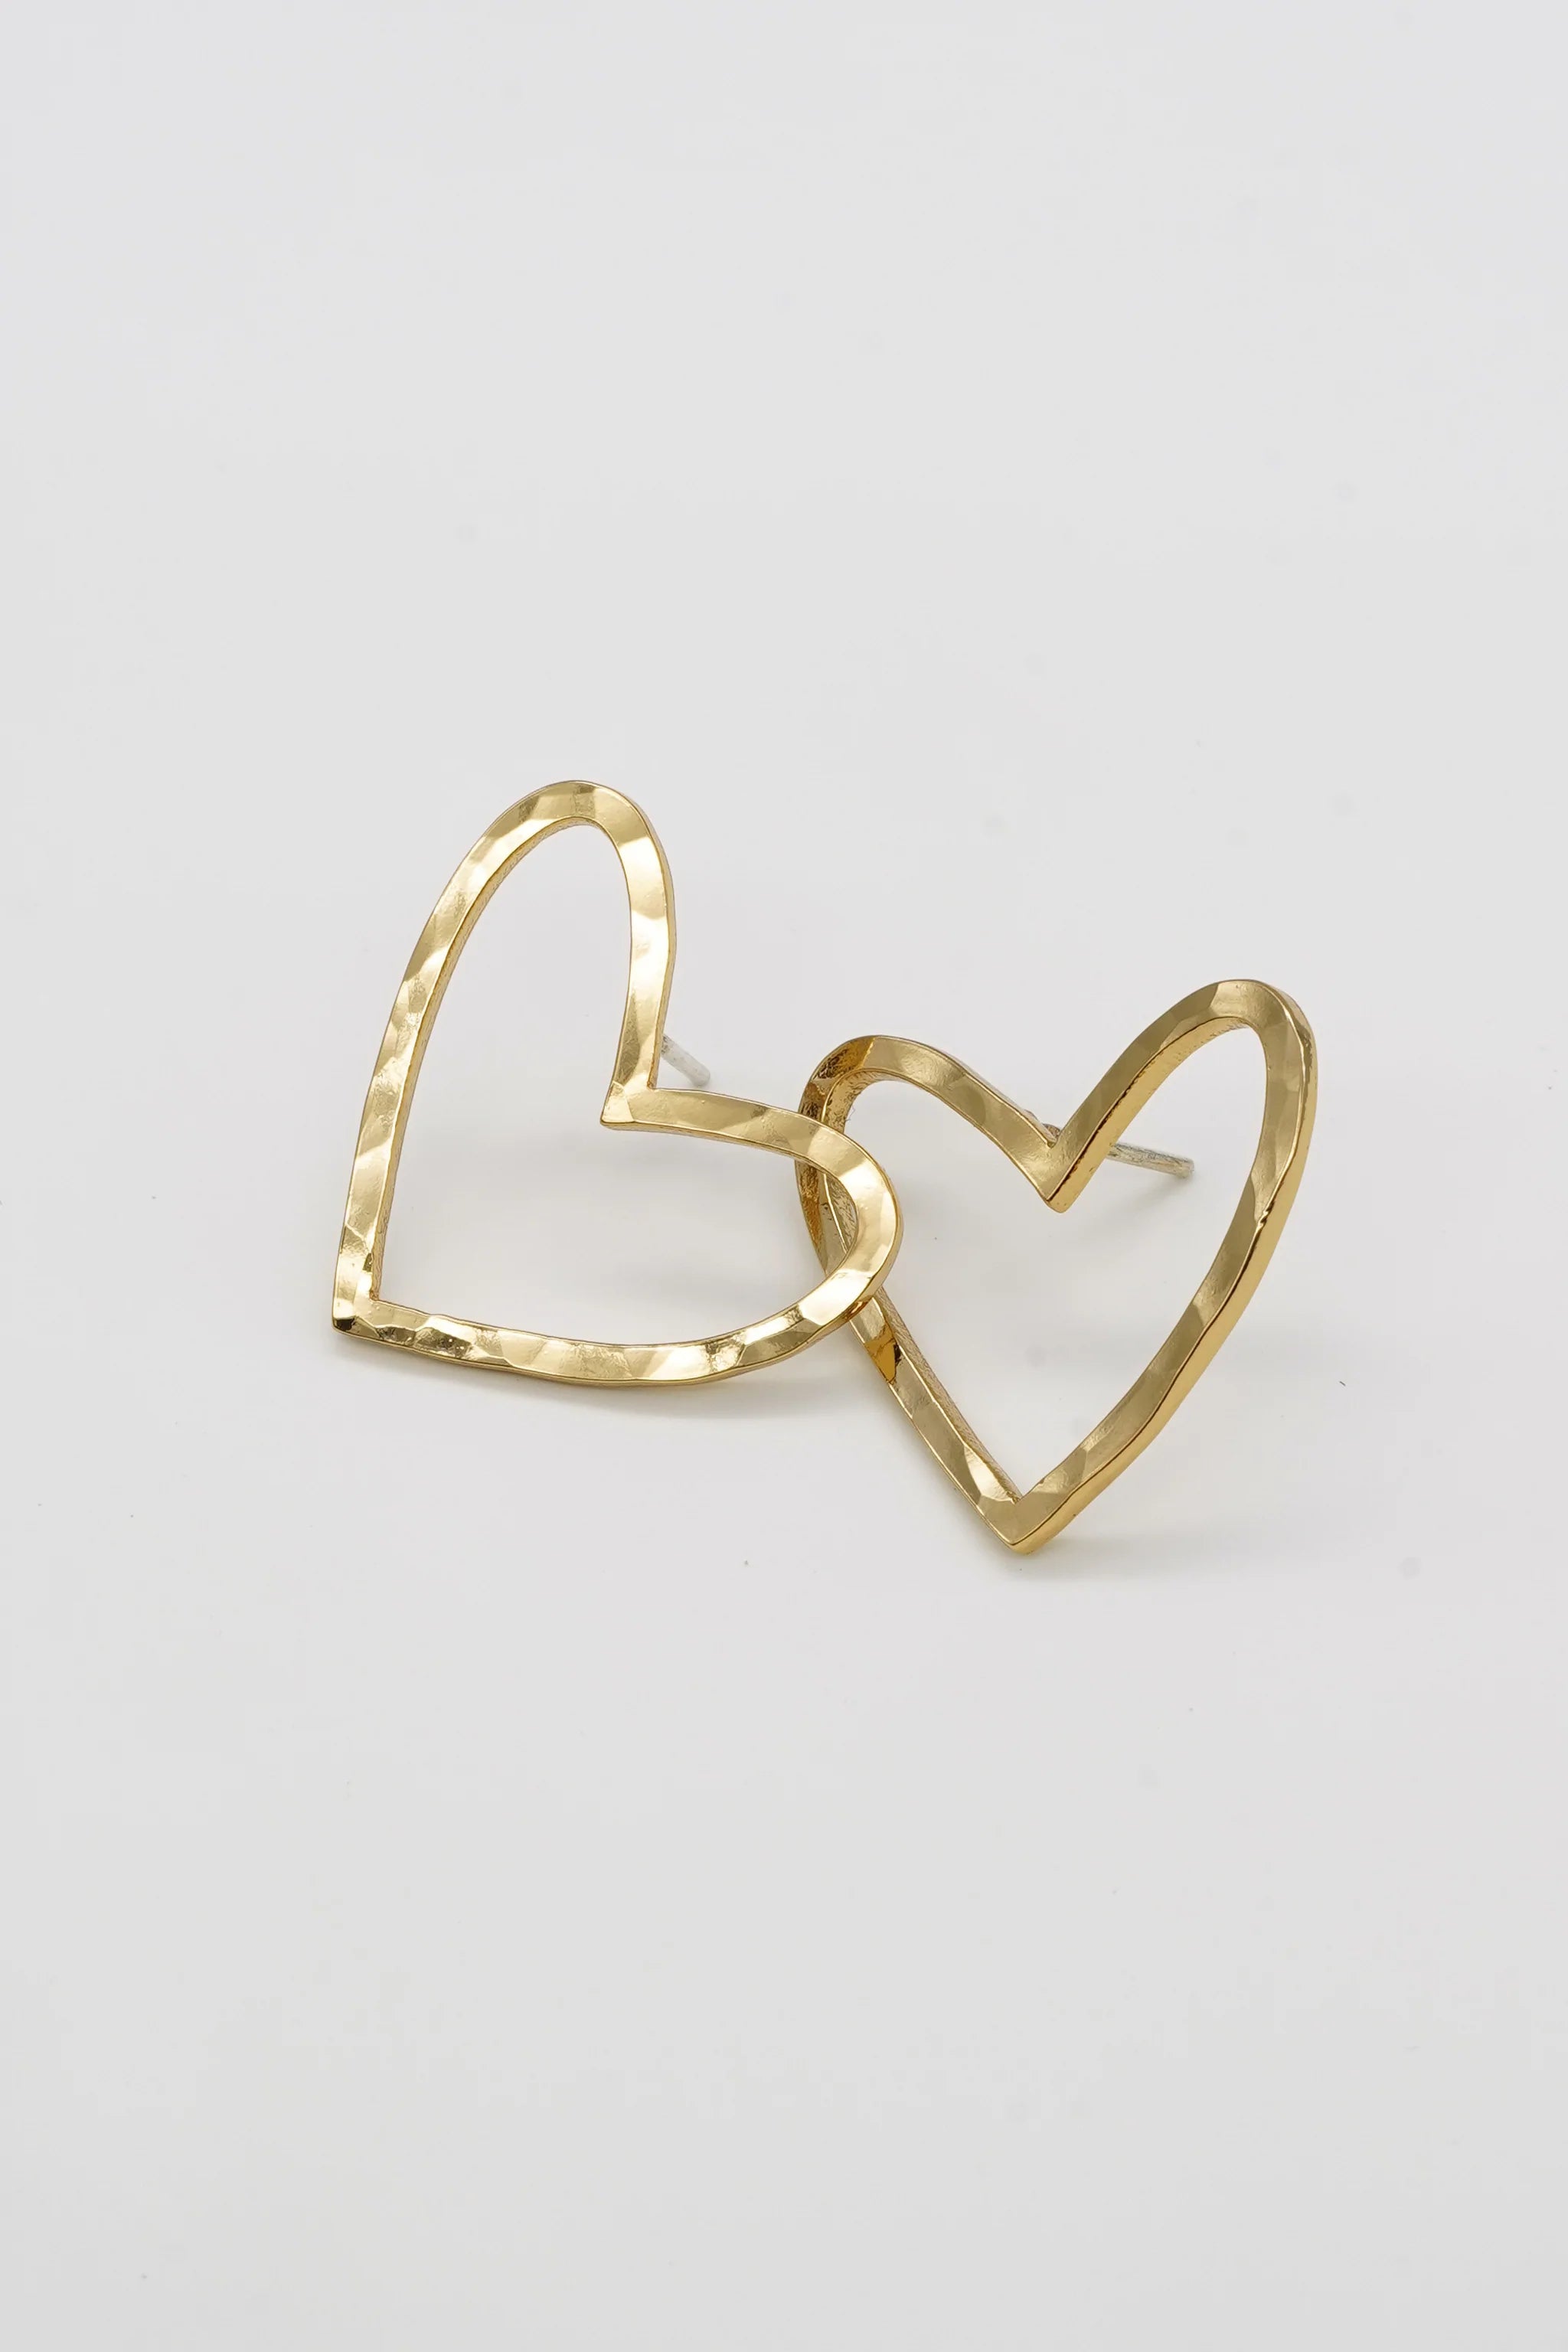 brenda grands jewelry, heart shaped earrings, sealed with love heart studs, gold earrings, ethically made, curate